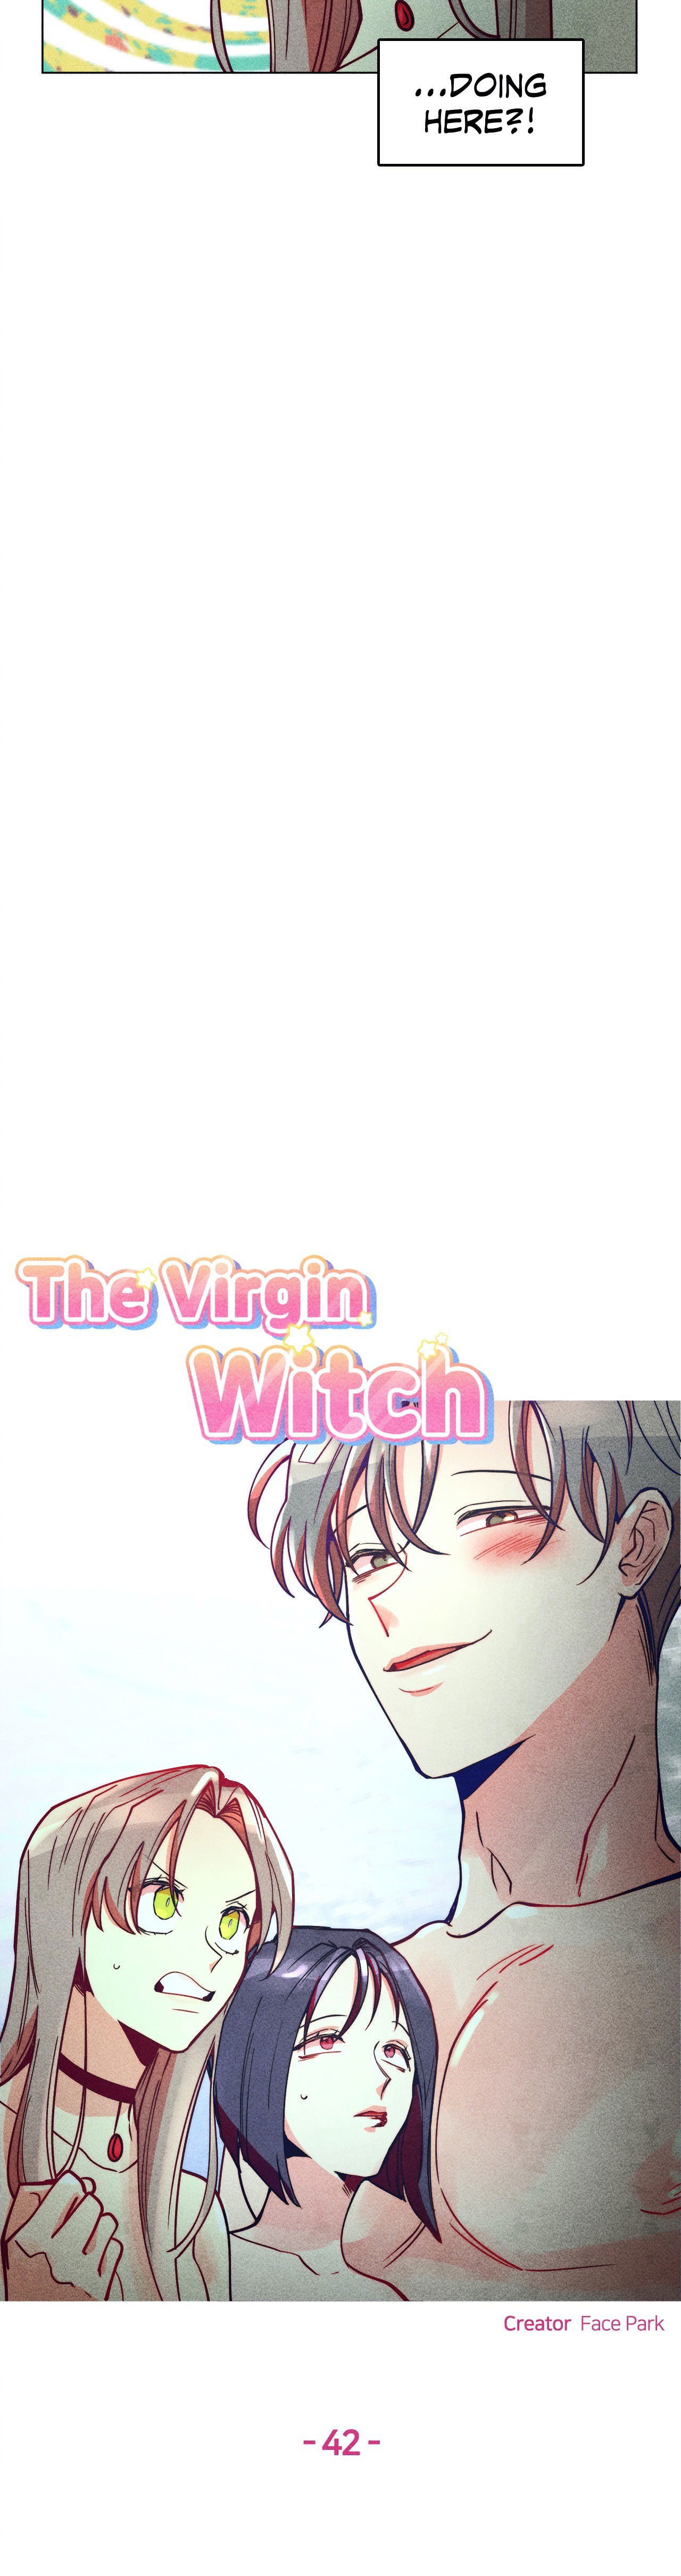 the-virgin-witch-chap-42-5